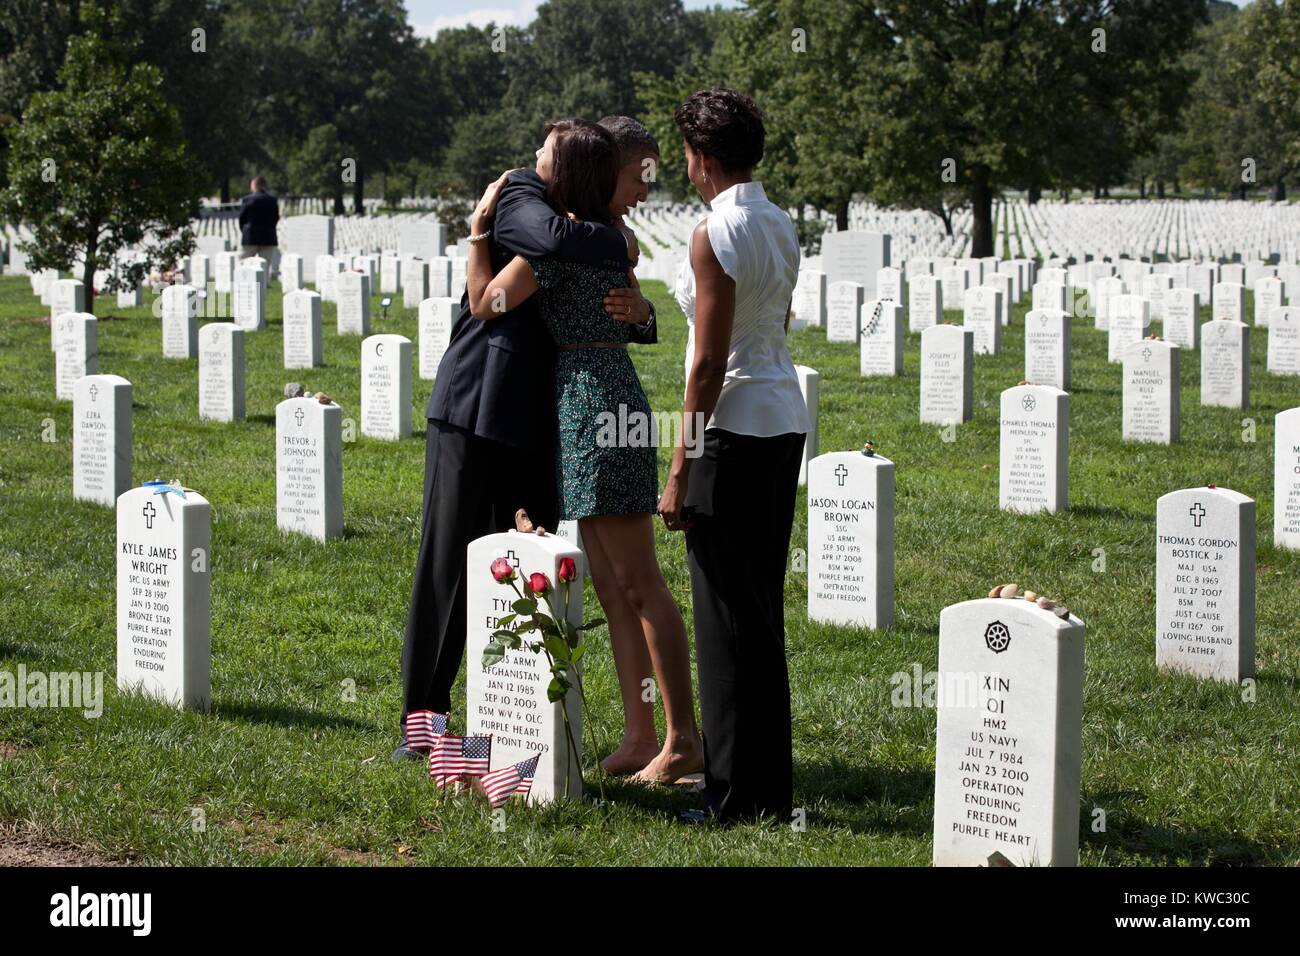 President Barack Obama in Section 60 of Arlington National Cemetery, Sept. 10, 2011. Section 60 is reserved for military personnel who have lost their lives while fighting in Afghanistan and Iraq. First Lady Michelle Obama is at right. (BSLOC 2015 13 162) Stock Photo